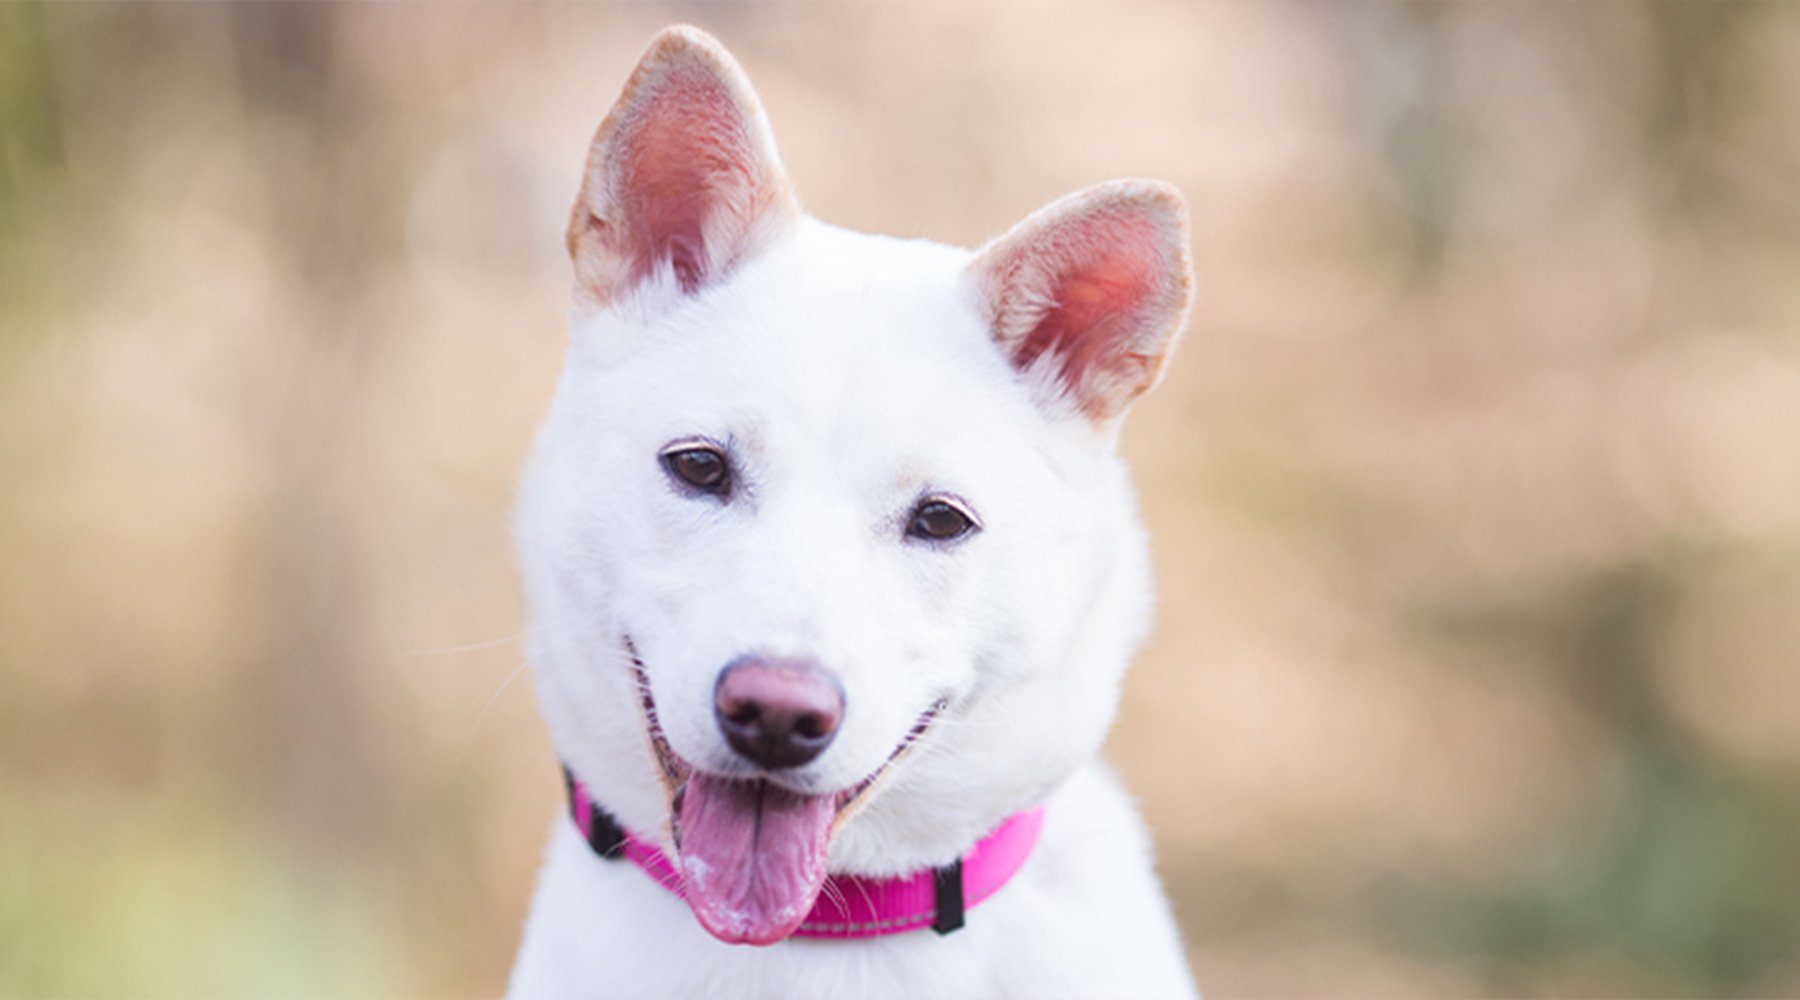 Belle the jindo puppy smiles tongue out at the camera